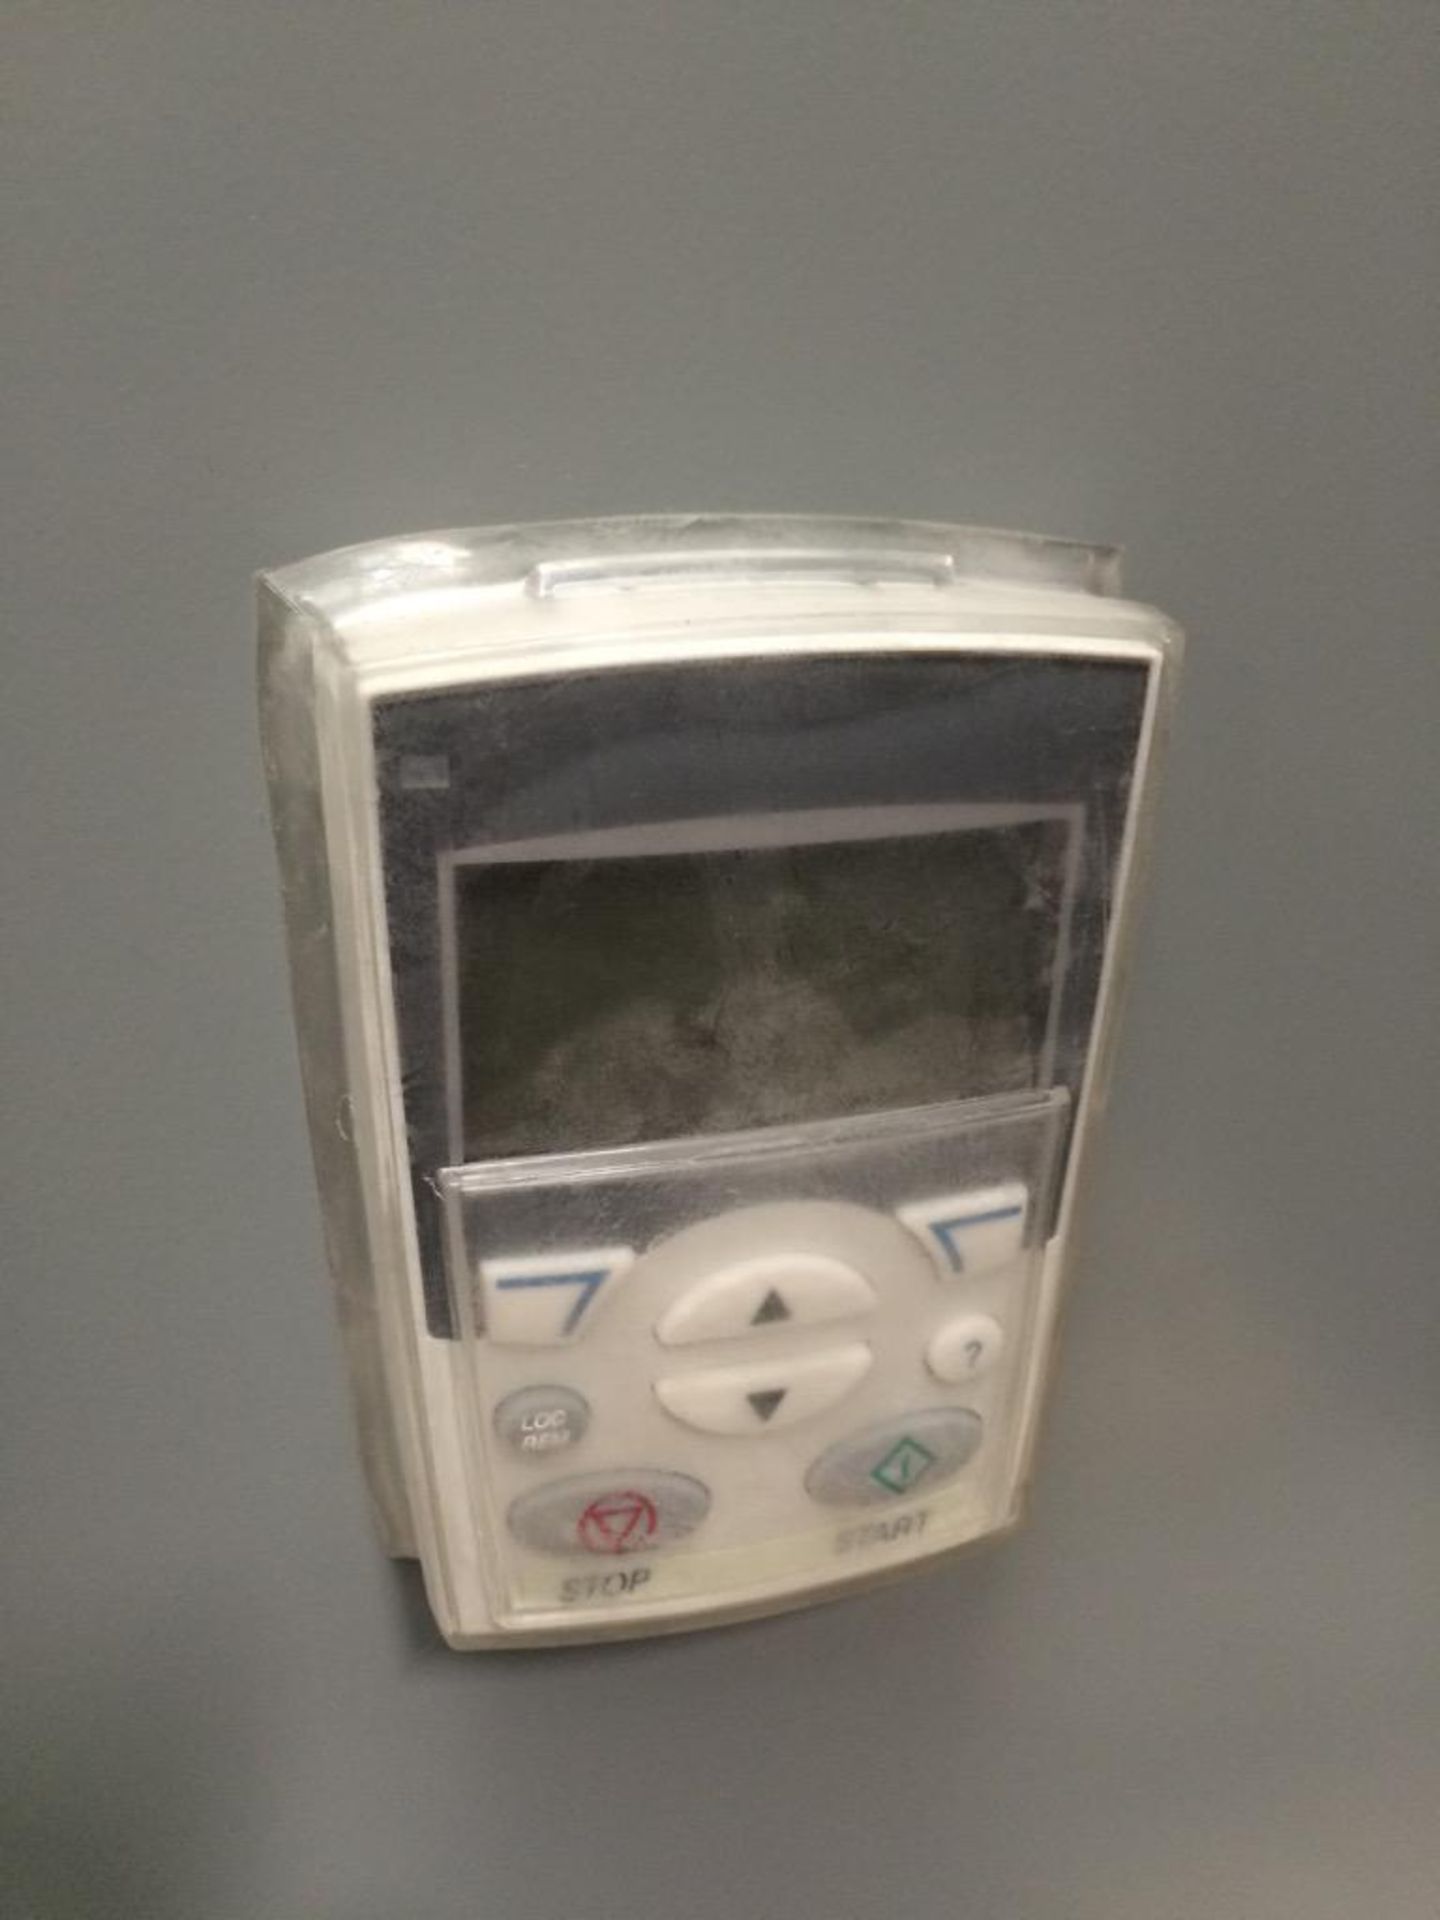 Never Installed TCP 25HP ABB VFD Enclosure Serial Number 120313-01 Includes Cooling Fans, Breakers, - Image 4 of 11